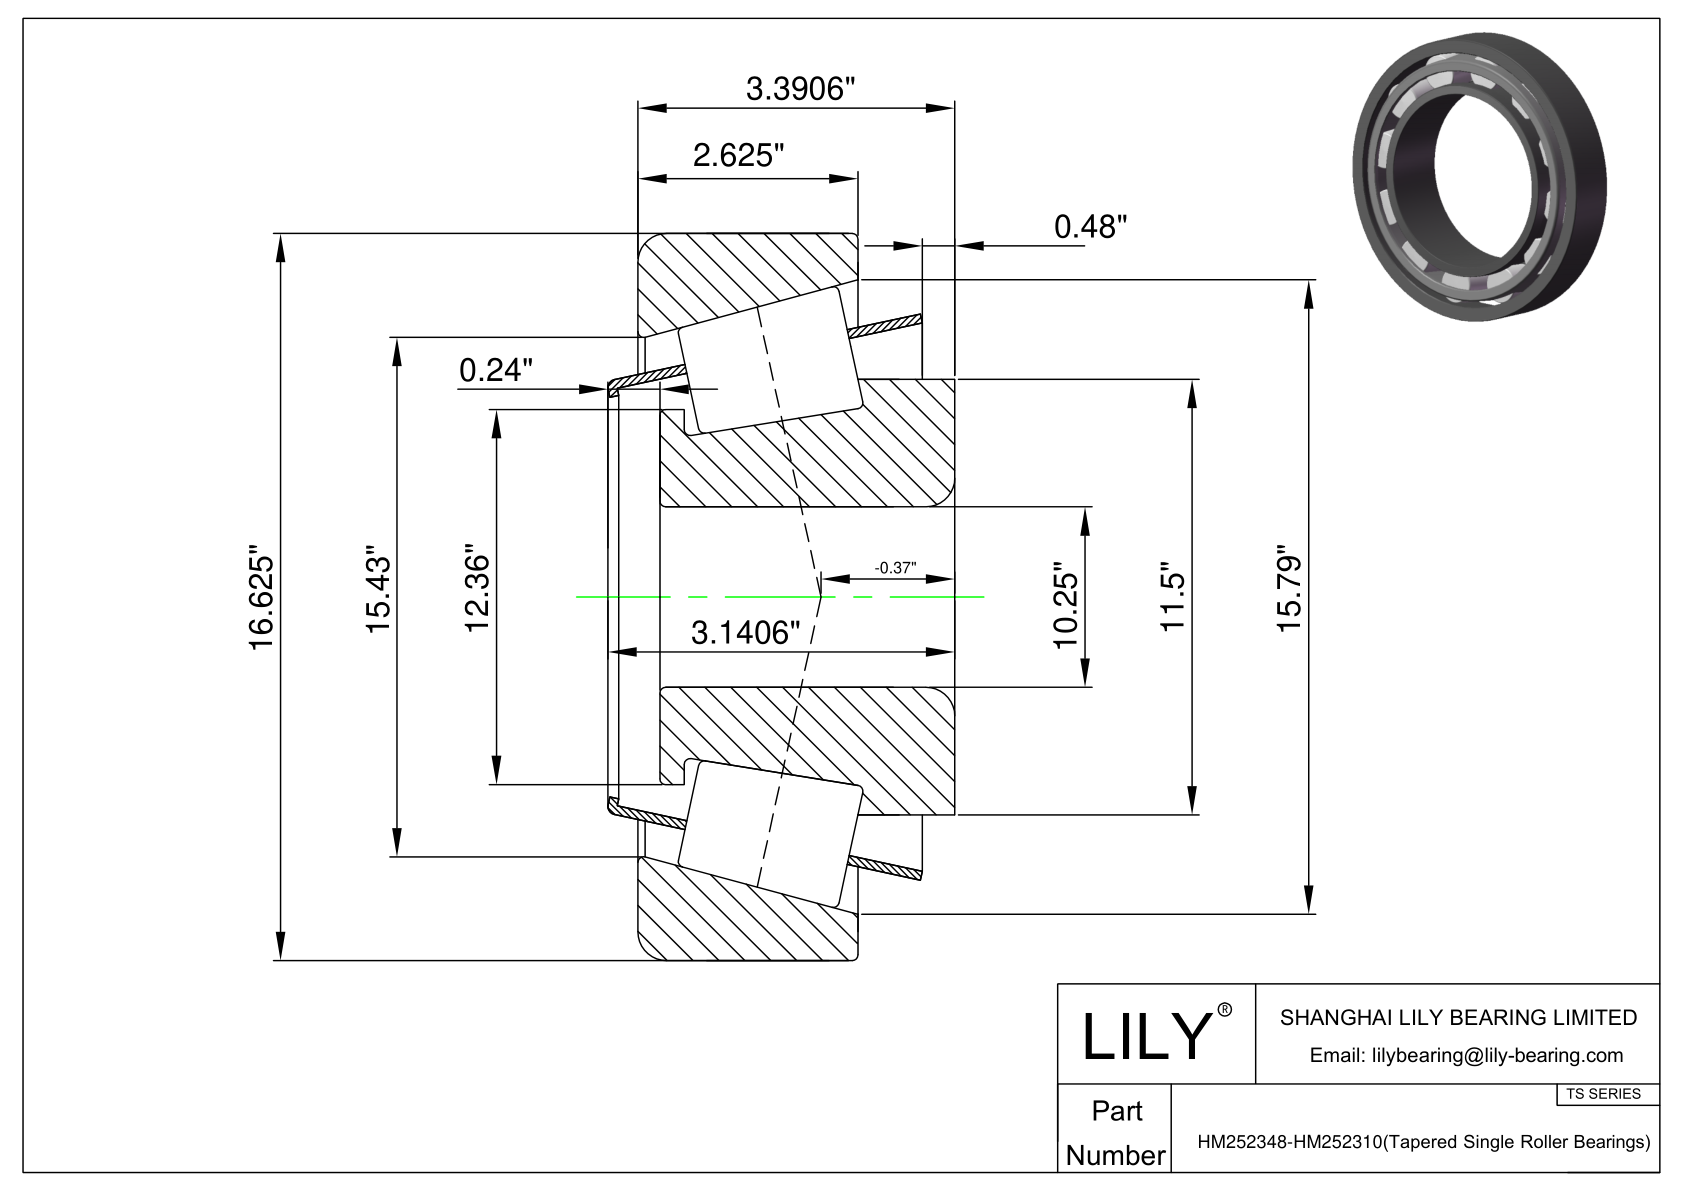 HM252348-HM252310 TS (Tapered Single Roller Bearings) (Imperial) cad drawing